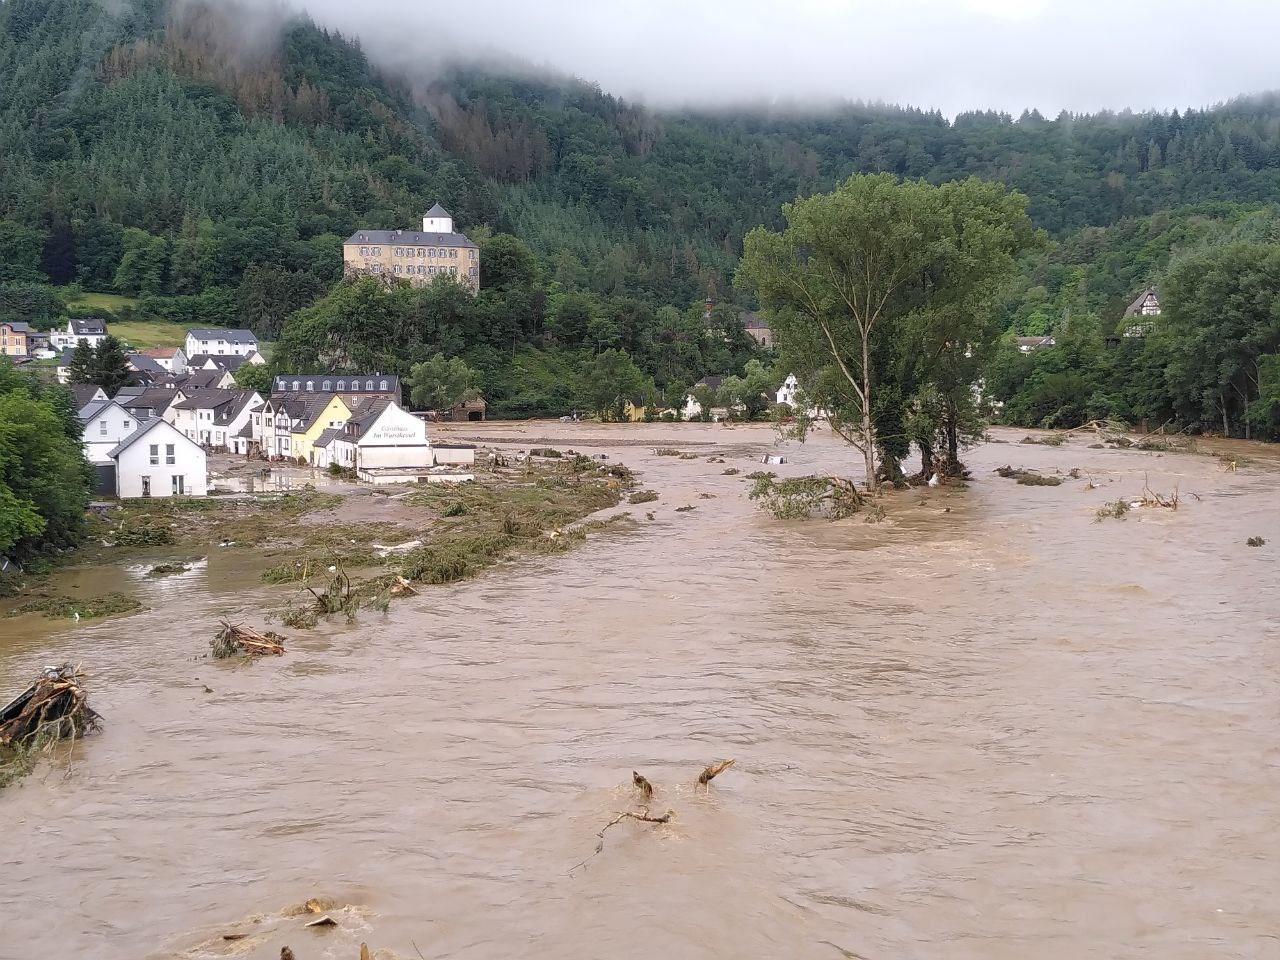 Buildings and trees in the Ahr Valley in Altenahr, Germany devasted by flooding in July 2021.